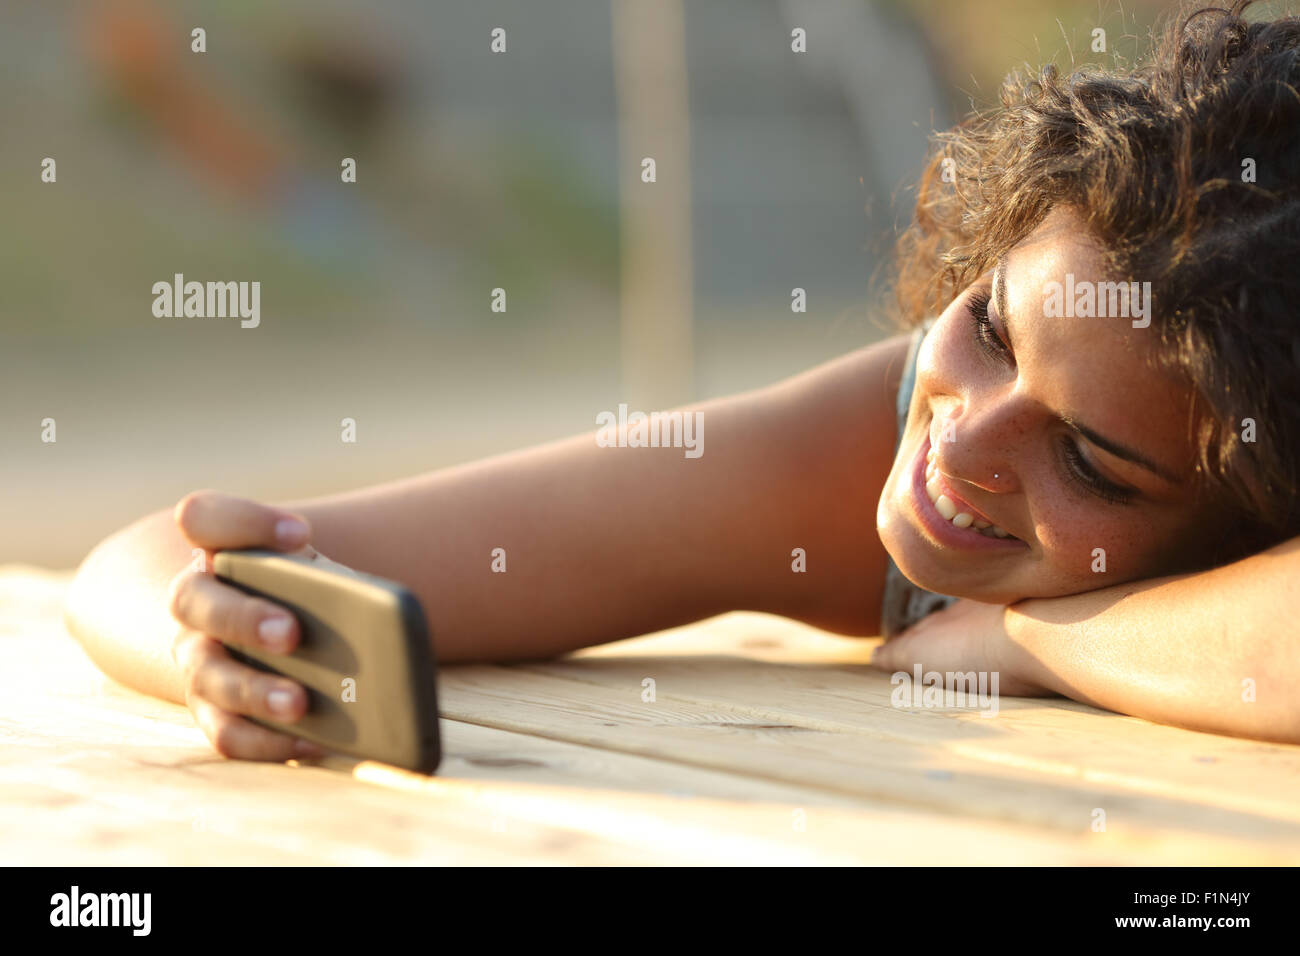 Girl watching videos or social media in a smart phone relaxing in a park at sunset Stock Photo